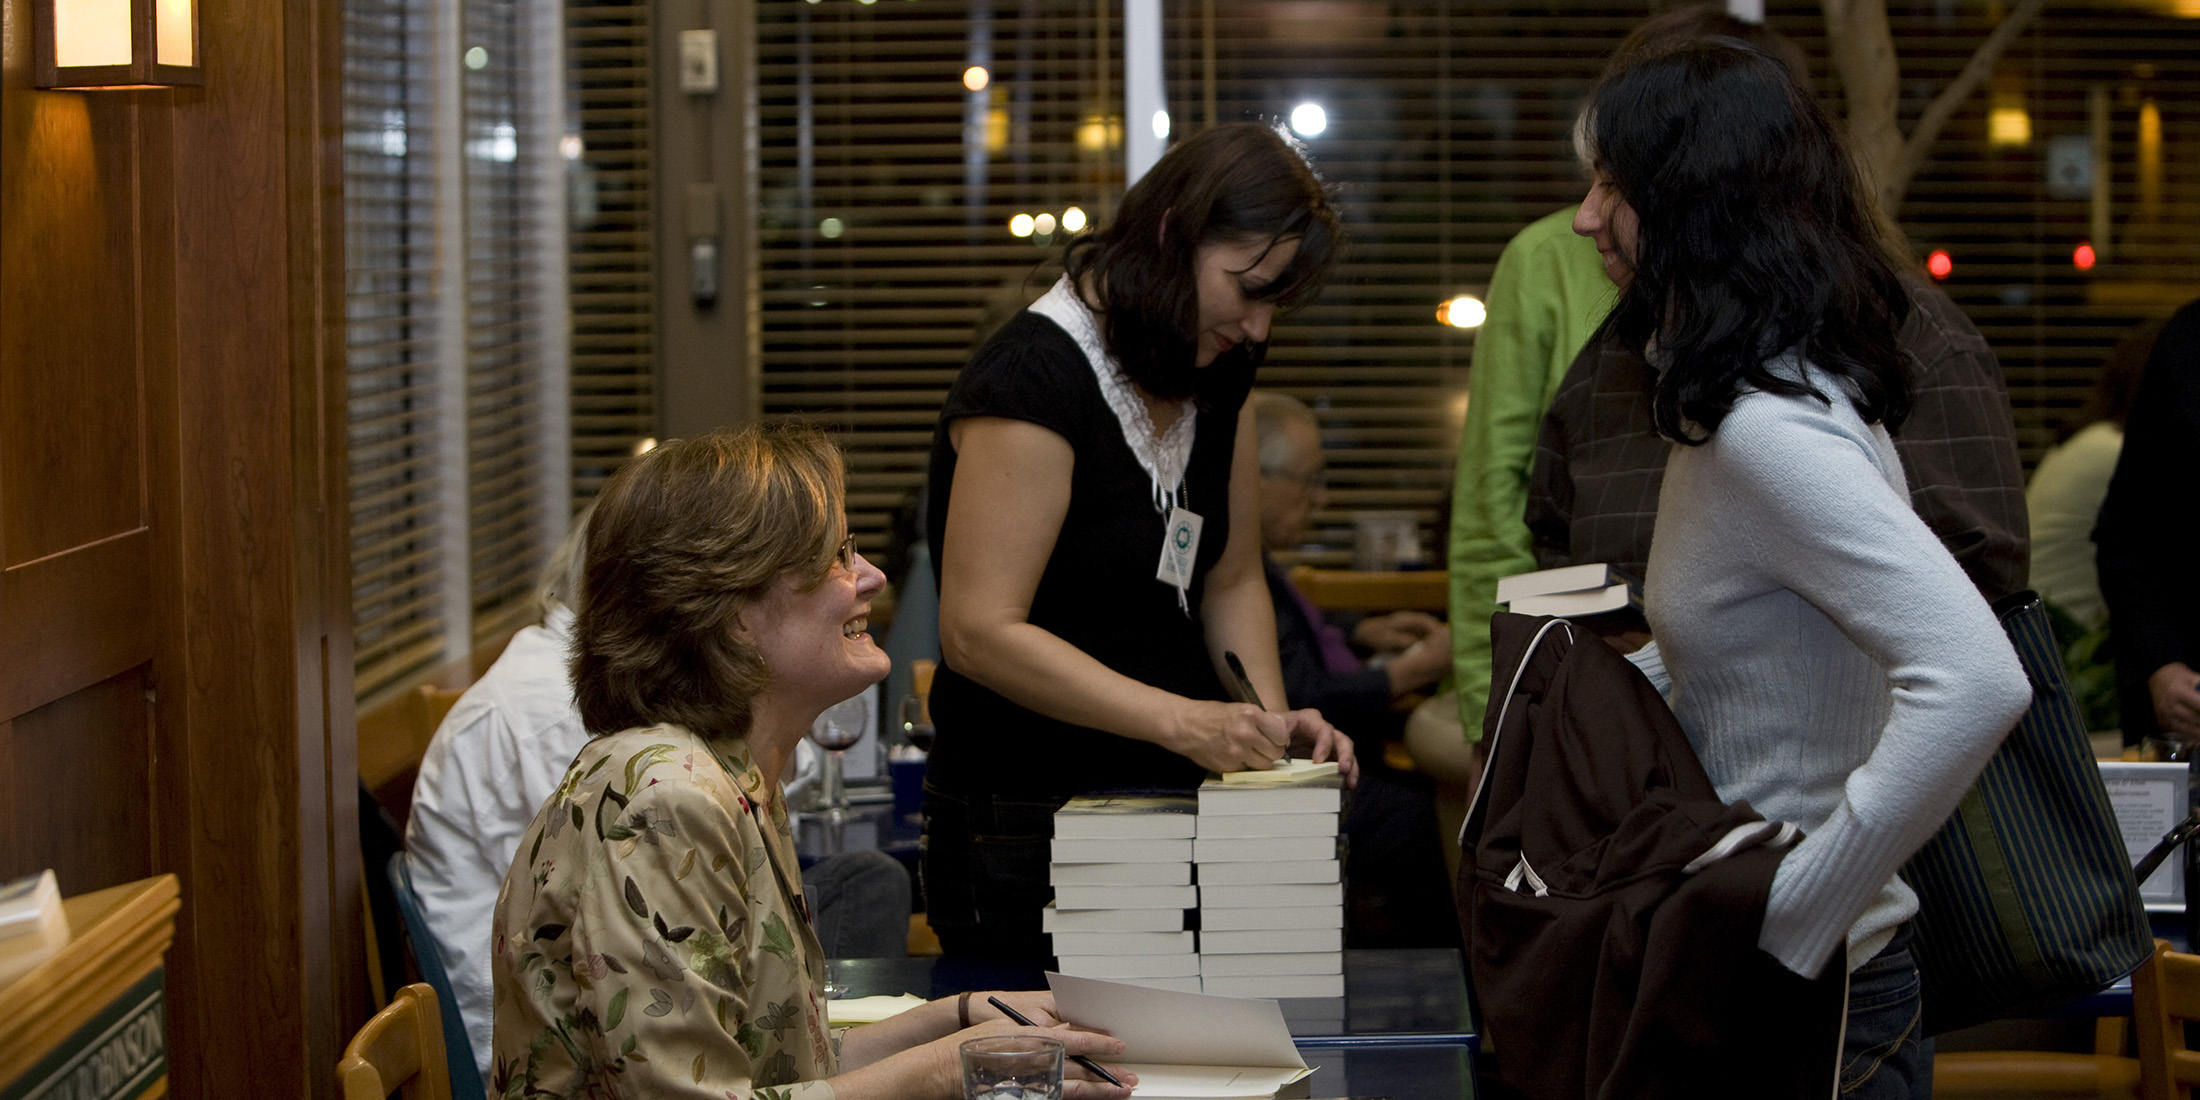 Author Joan Thomas signing books at a launch event